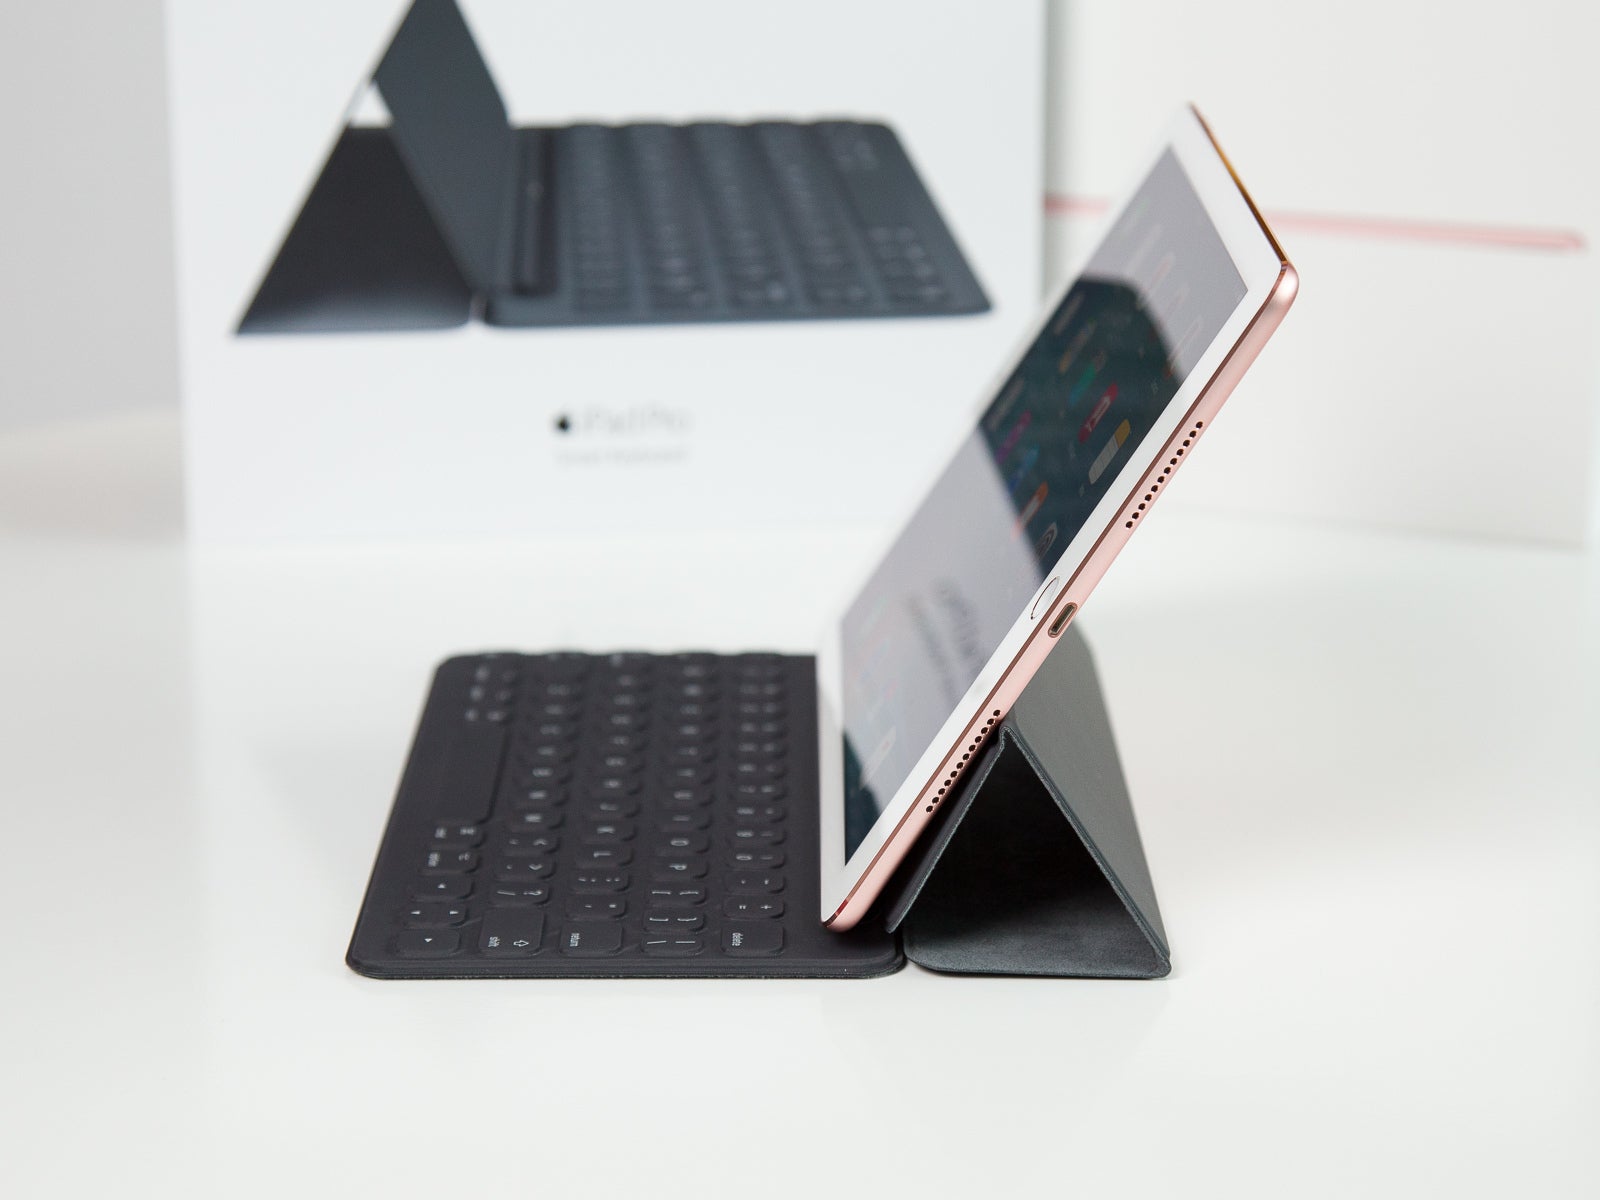 iPad with Smart Keyboard - Prediction: the iPhone mini is not dead, it will rise from the ashes